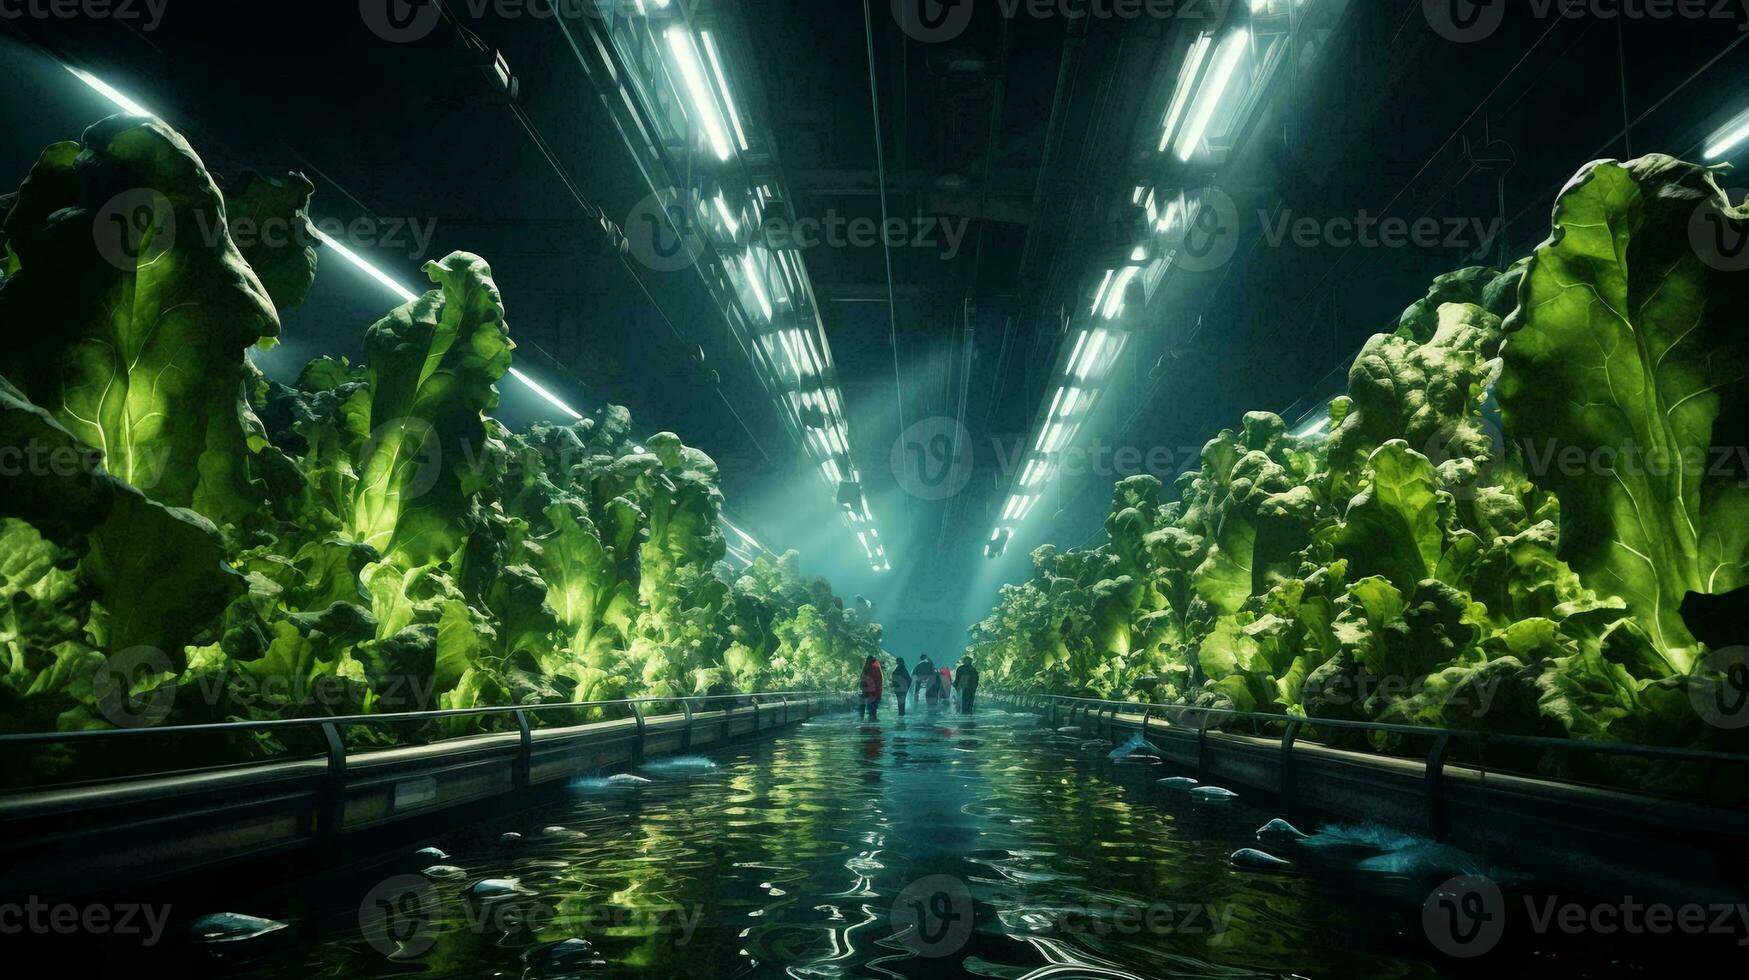 Green eco-friendly hydroponic farm for growing greens and plants in artificial conditions photo